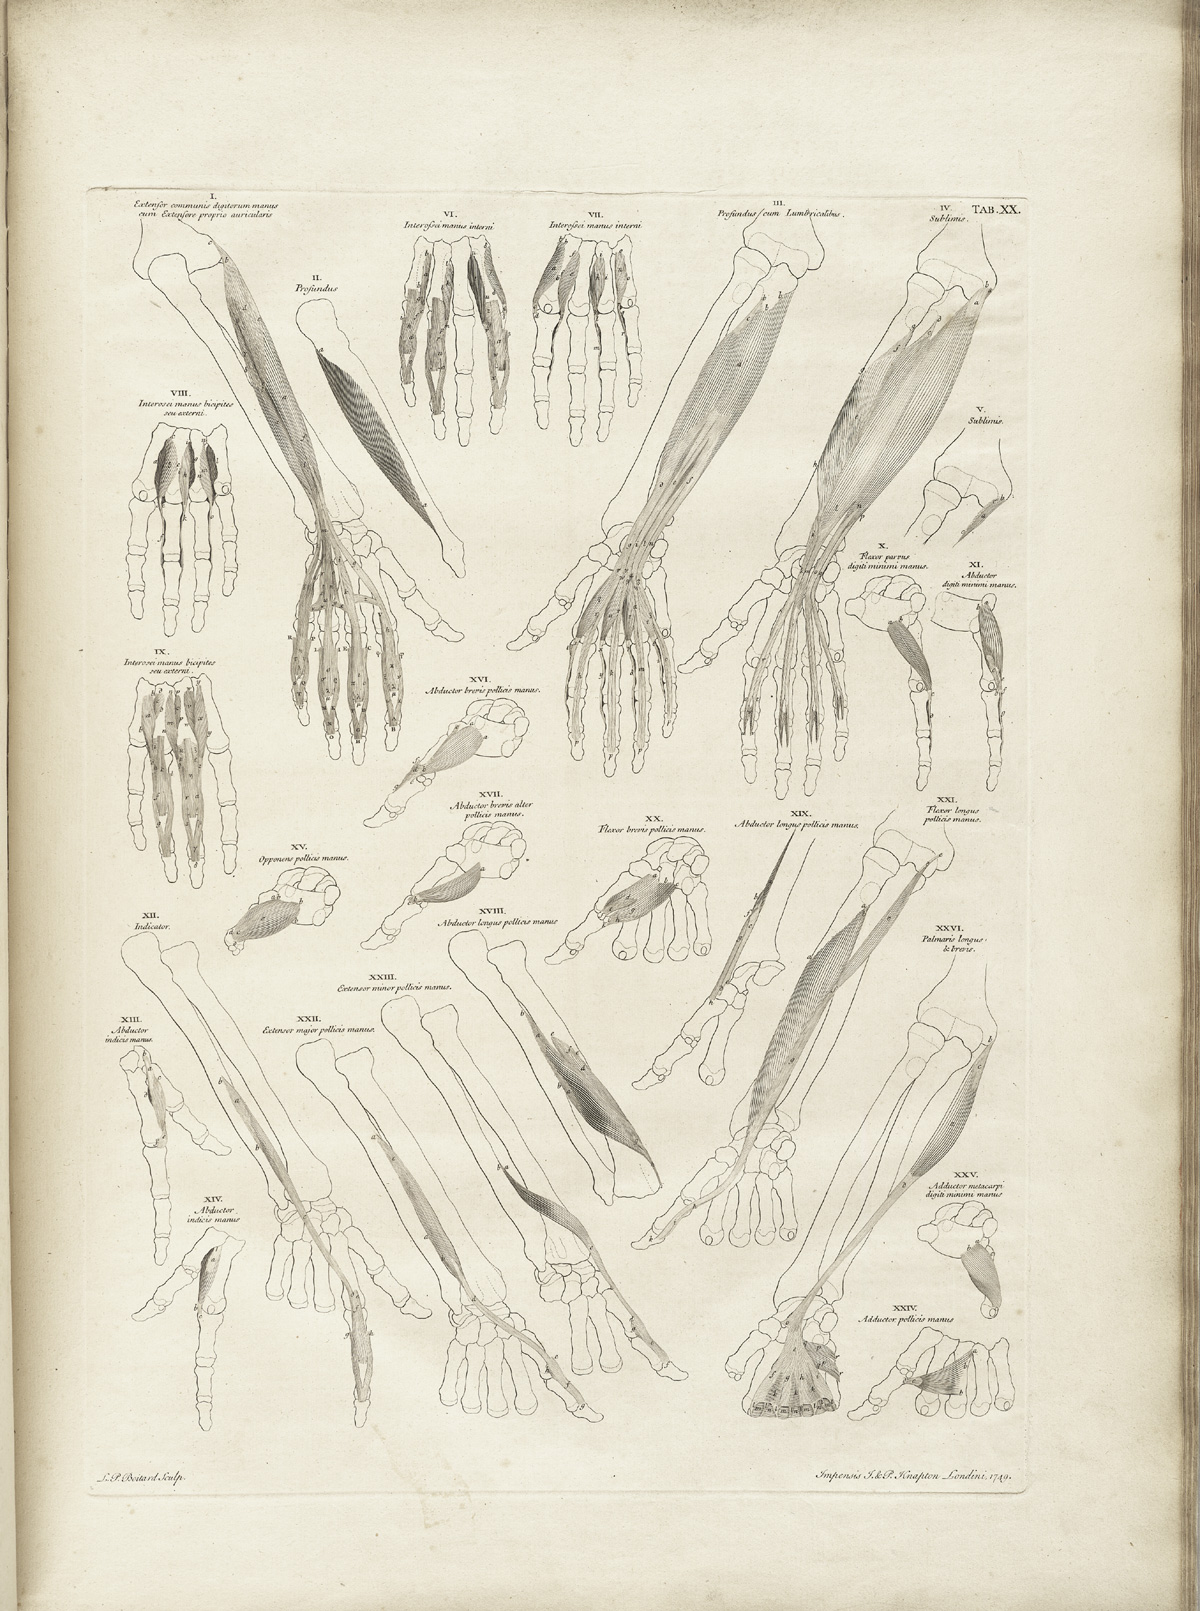 Table 20 of Bernhard Siegfried Albinus' Tabulae sceleti et musculorum corporis humani, featuring the multiple front and side views of the muscles of the lower arm and hand.